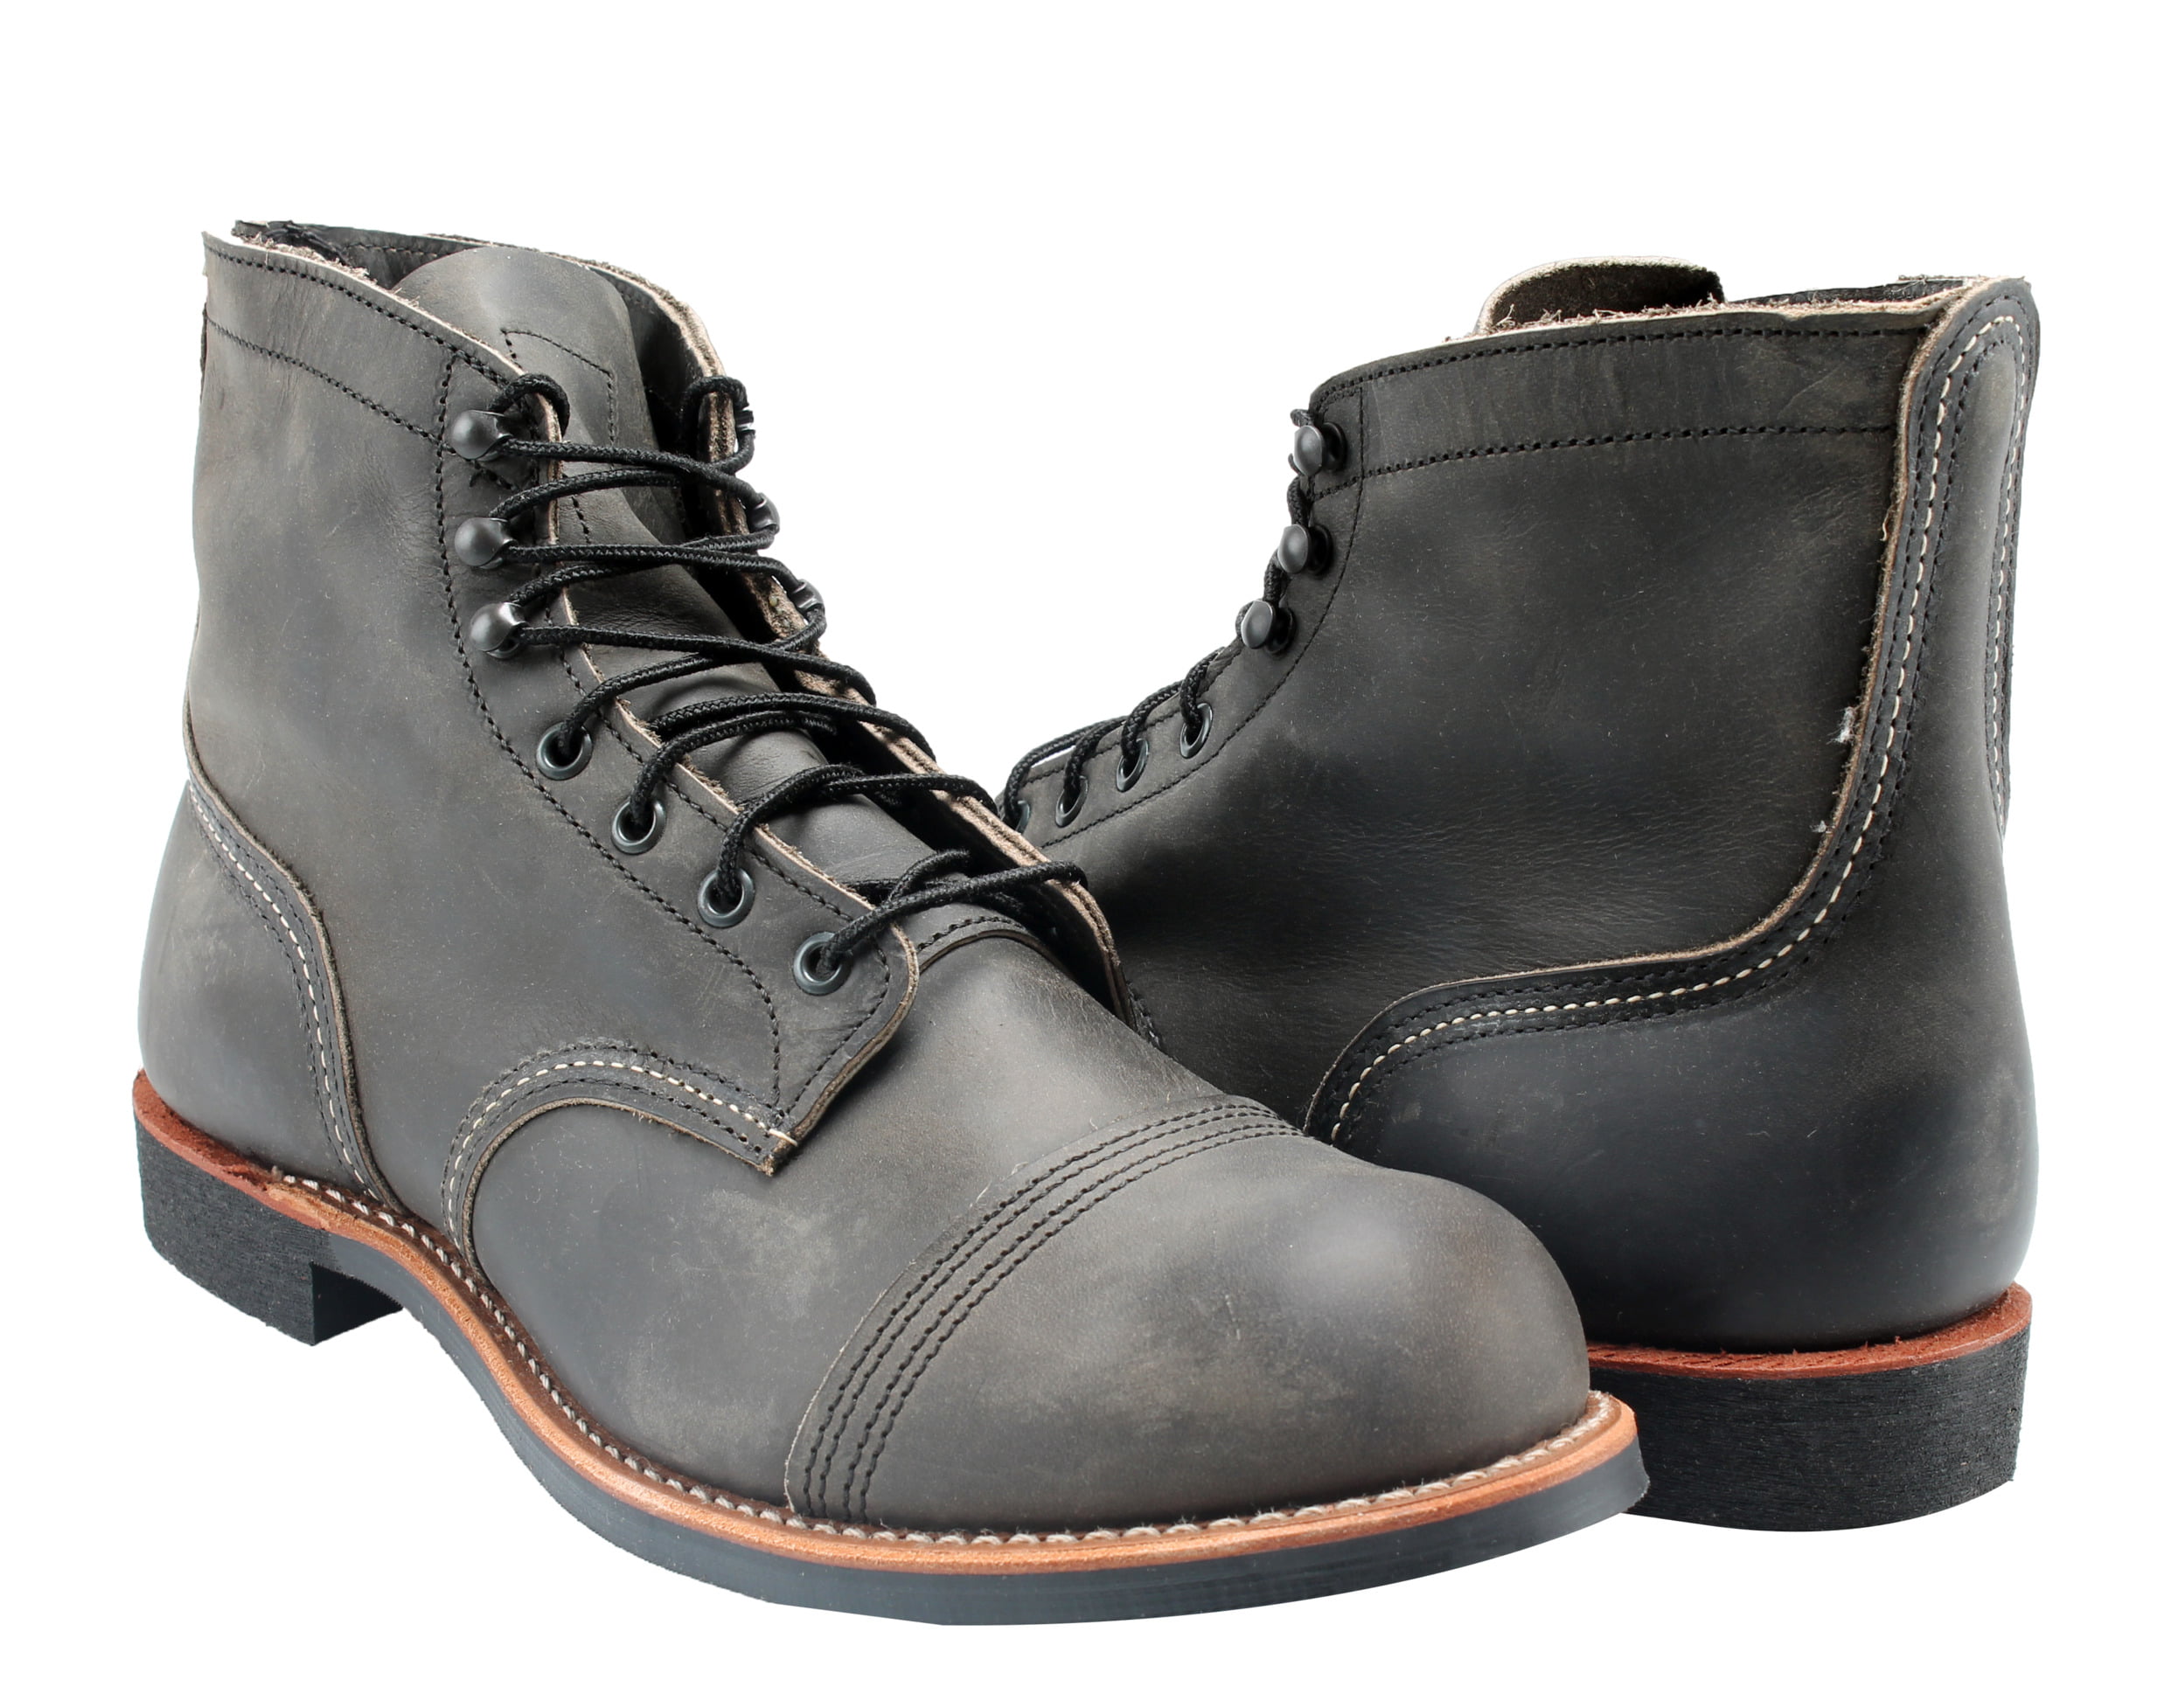 Red Wing Heritage 8086 Iron Ranger 6-Inch Cap Toe Men's Boots Size 13D ...